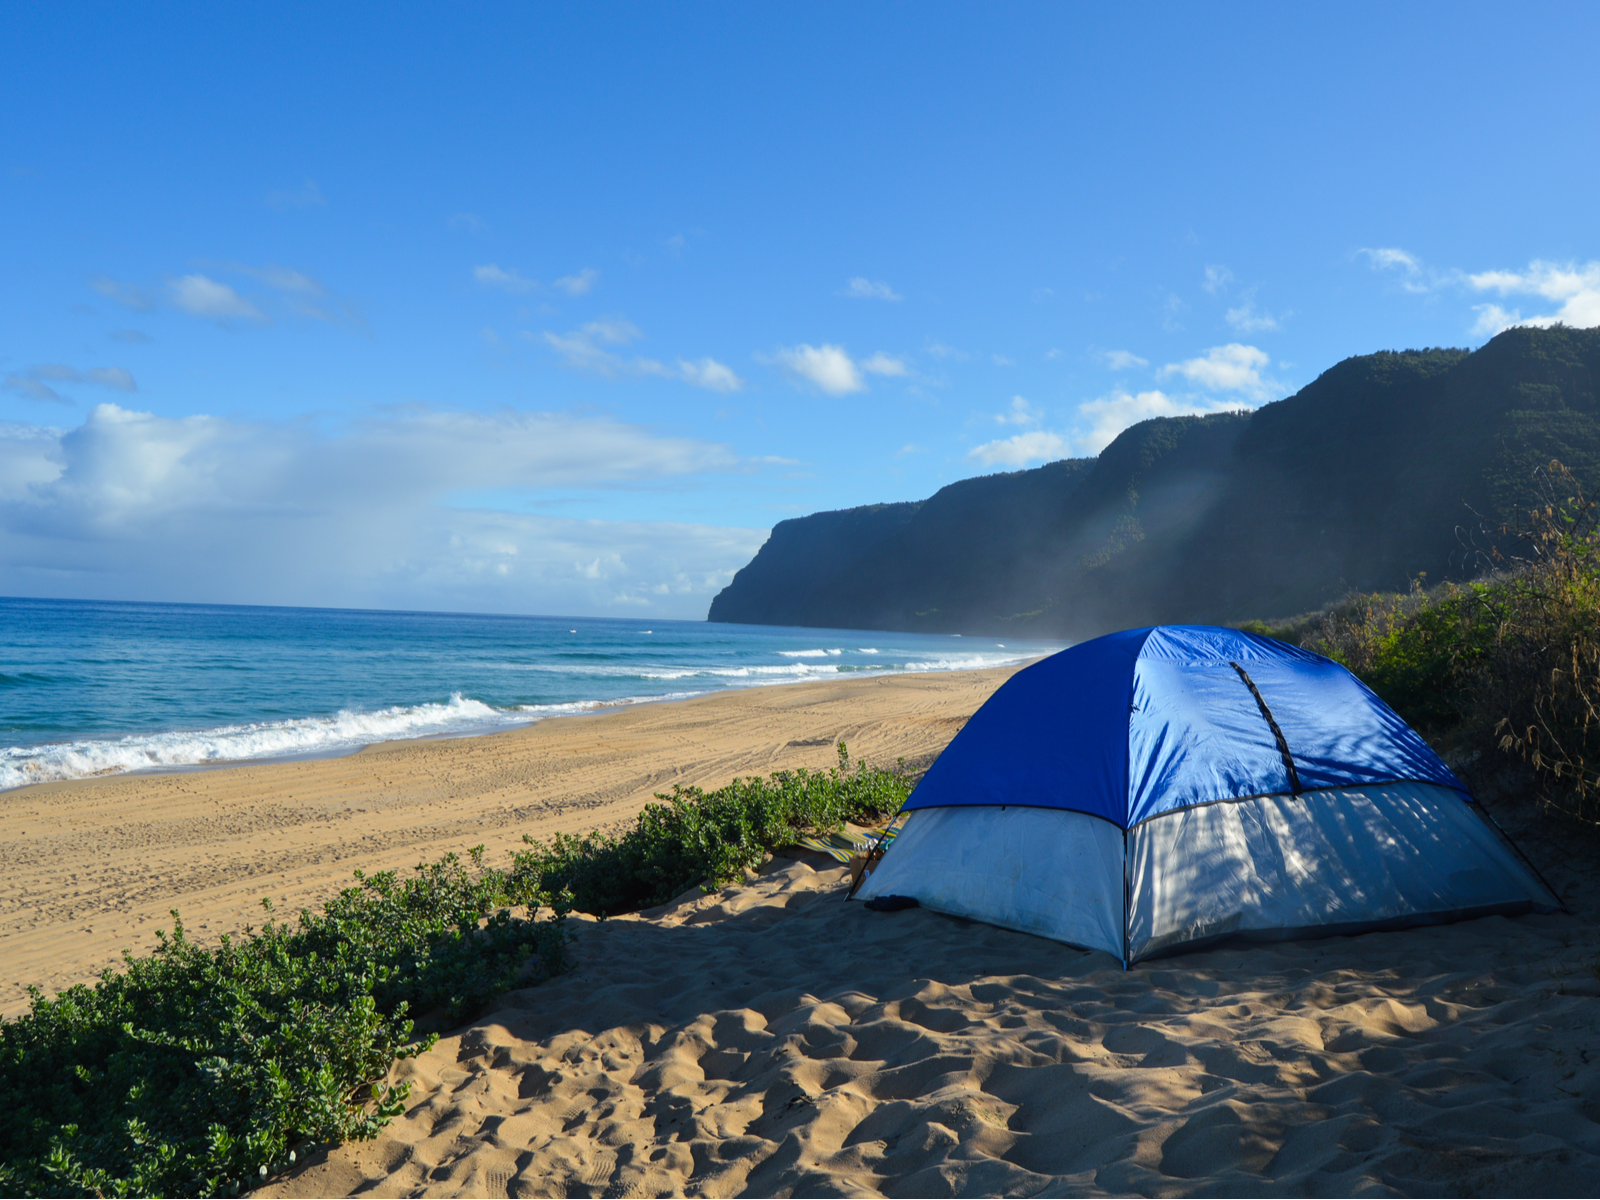 A tent set up on the shore at Polihale Park, camping here is one of the best things to do in Kauai with the scenic tropical beach view